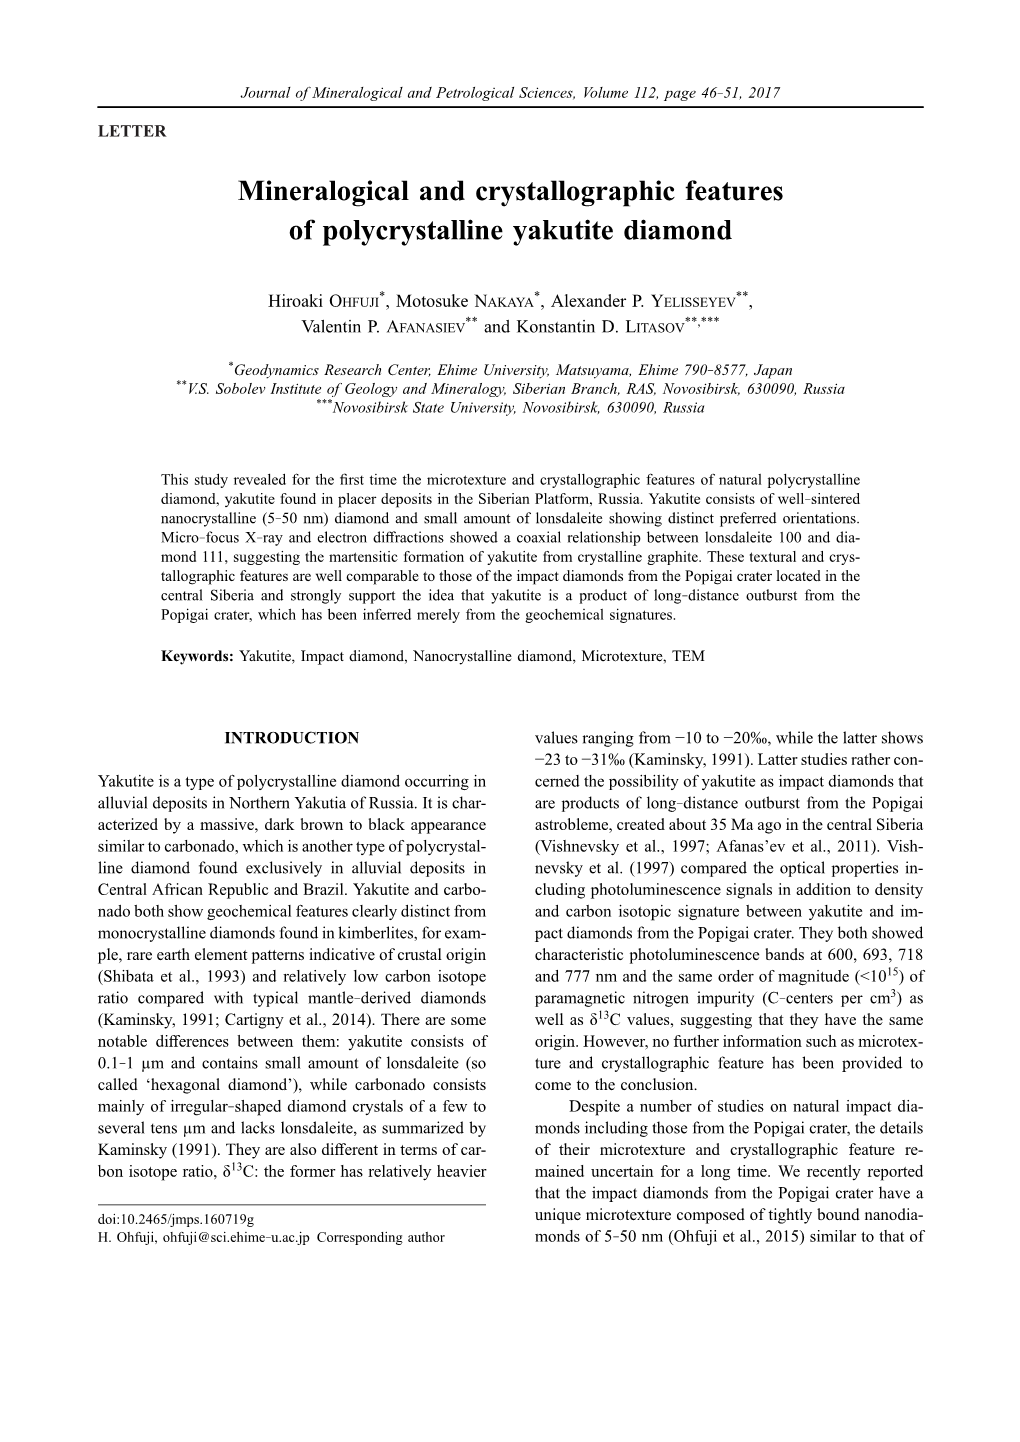 Mineralogical and Crystallographic Features of Polycrystalline Yakutite Diamond